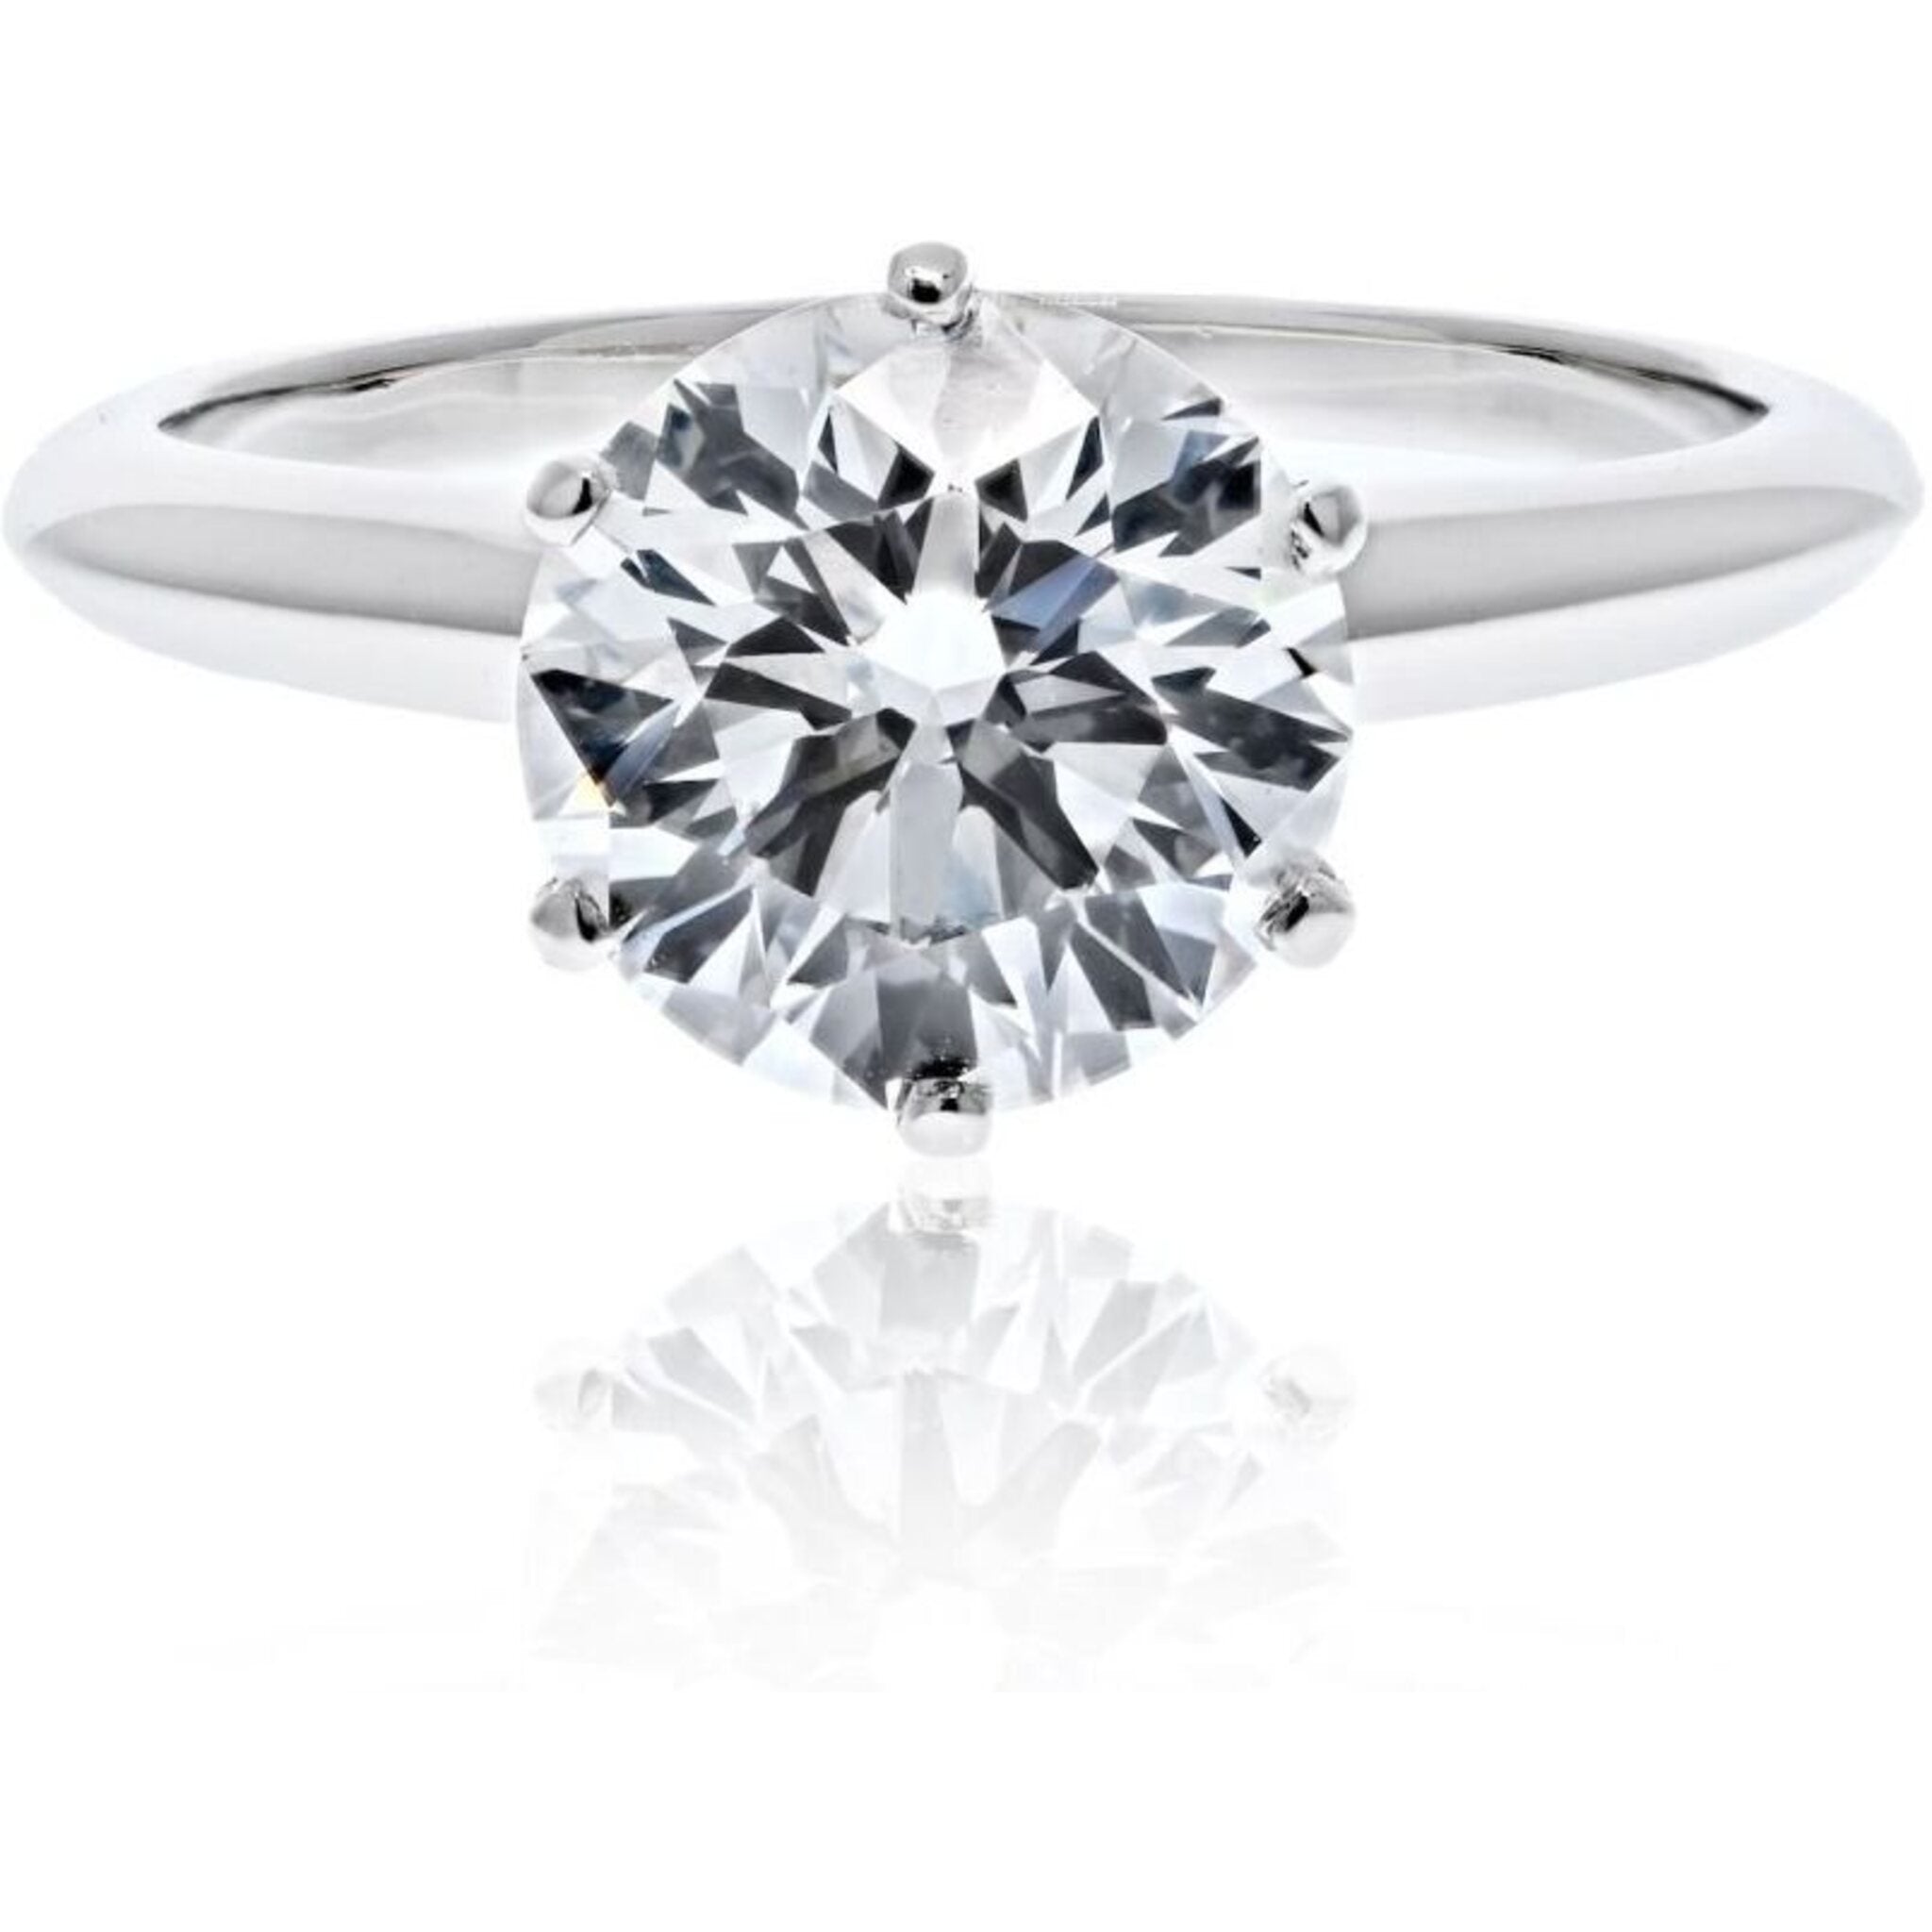 Tiffany and Co Halo Diamond Engagement Ring 001-100-01249 | Joint Venture  Jewelry | Cary, NC